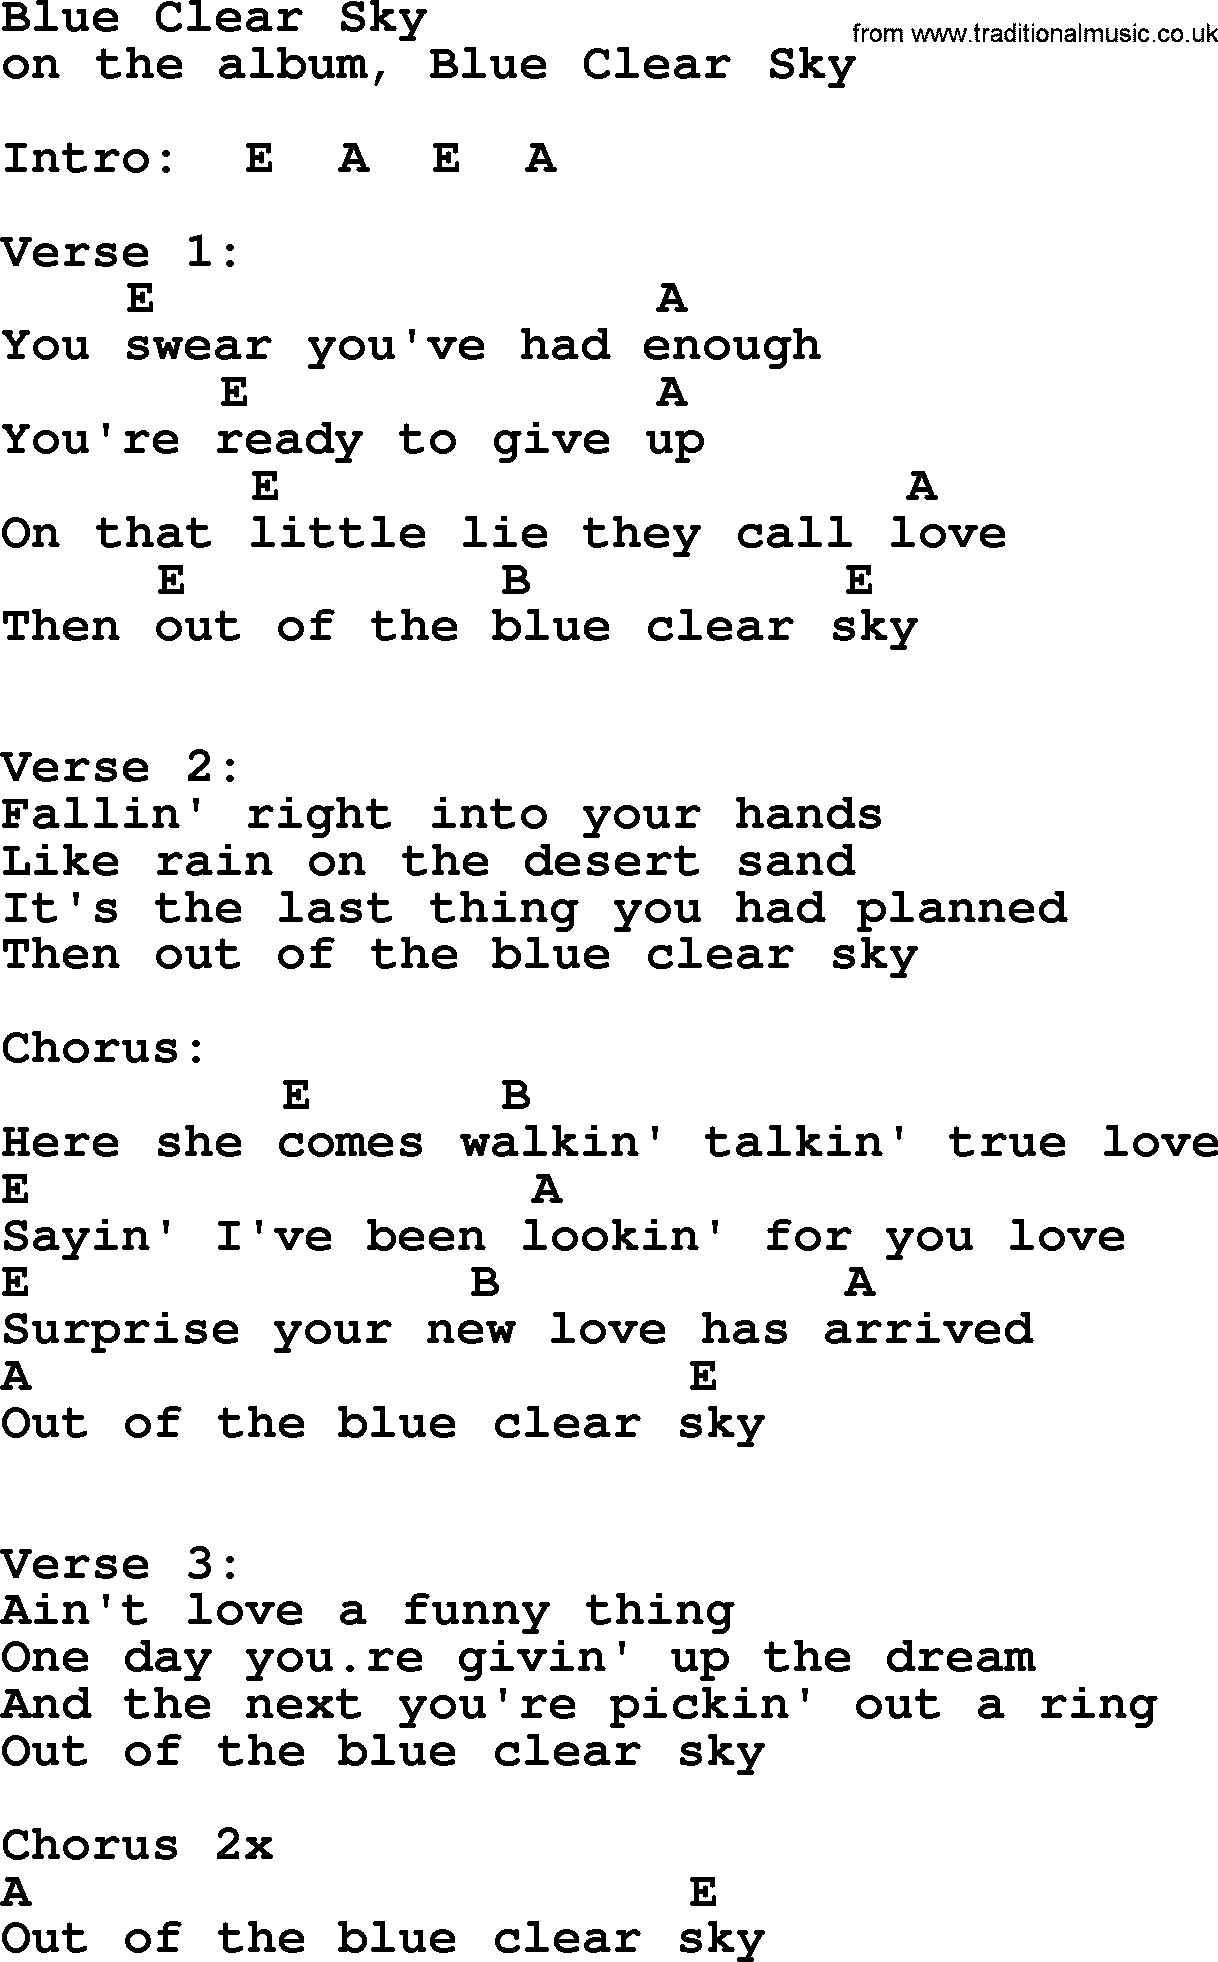 George Strait song: Blue Clear Sky, lyrics and chords